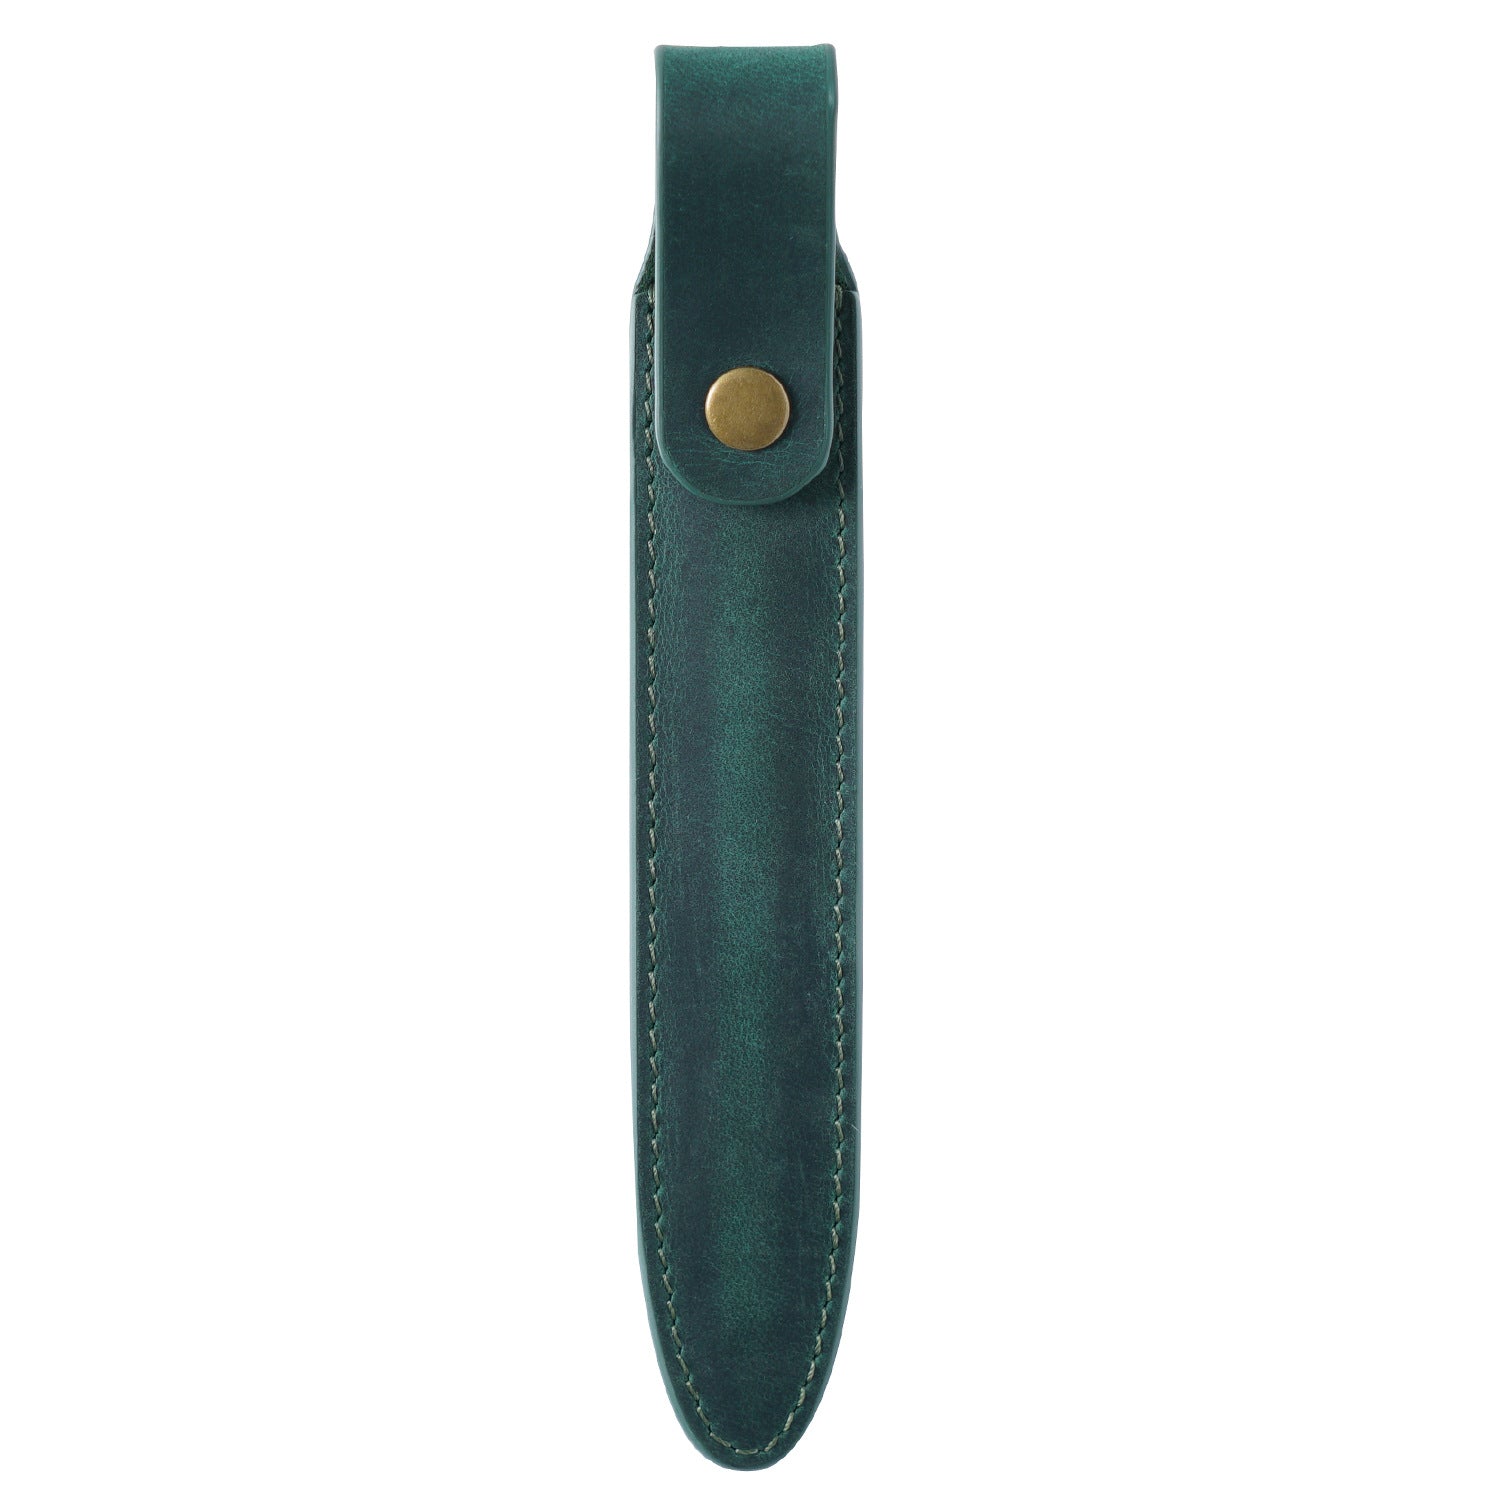 Vintage Leather Protect Pen Case P102-pen holder-Green-Free Shipping Leatheretro